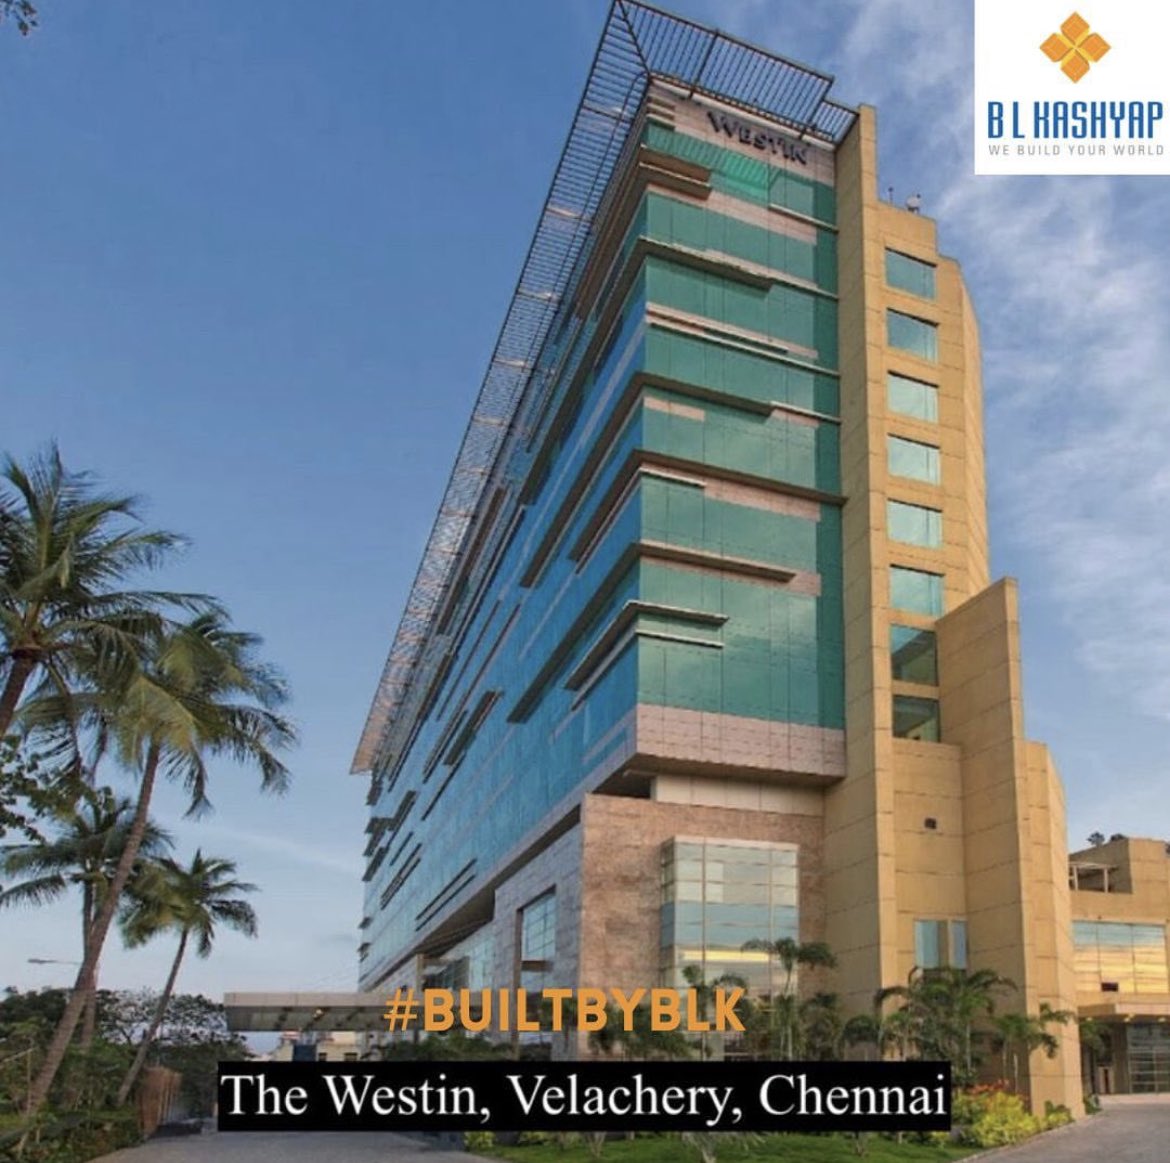 #BuiltByBLK The Westin Chennai Velachery is a 10-storied five-star hotel in Chennai. With 215 rooms built on a 7792 sq m plot, this is the brand's sixth property in India.

#BLKConstructions #ProjectsByBLK #BLKConstructs #ChennaiHotels #BLKProjects  #Chennai #WeBuildYourWorld